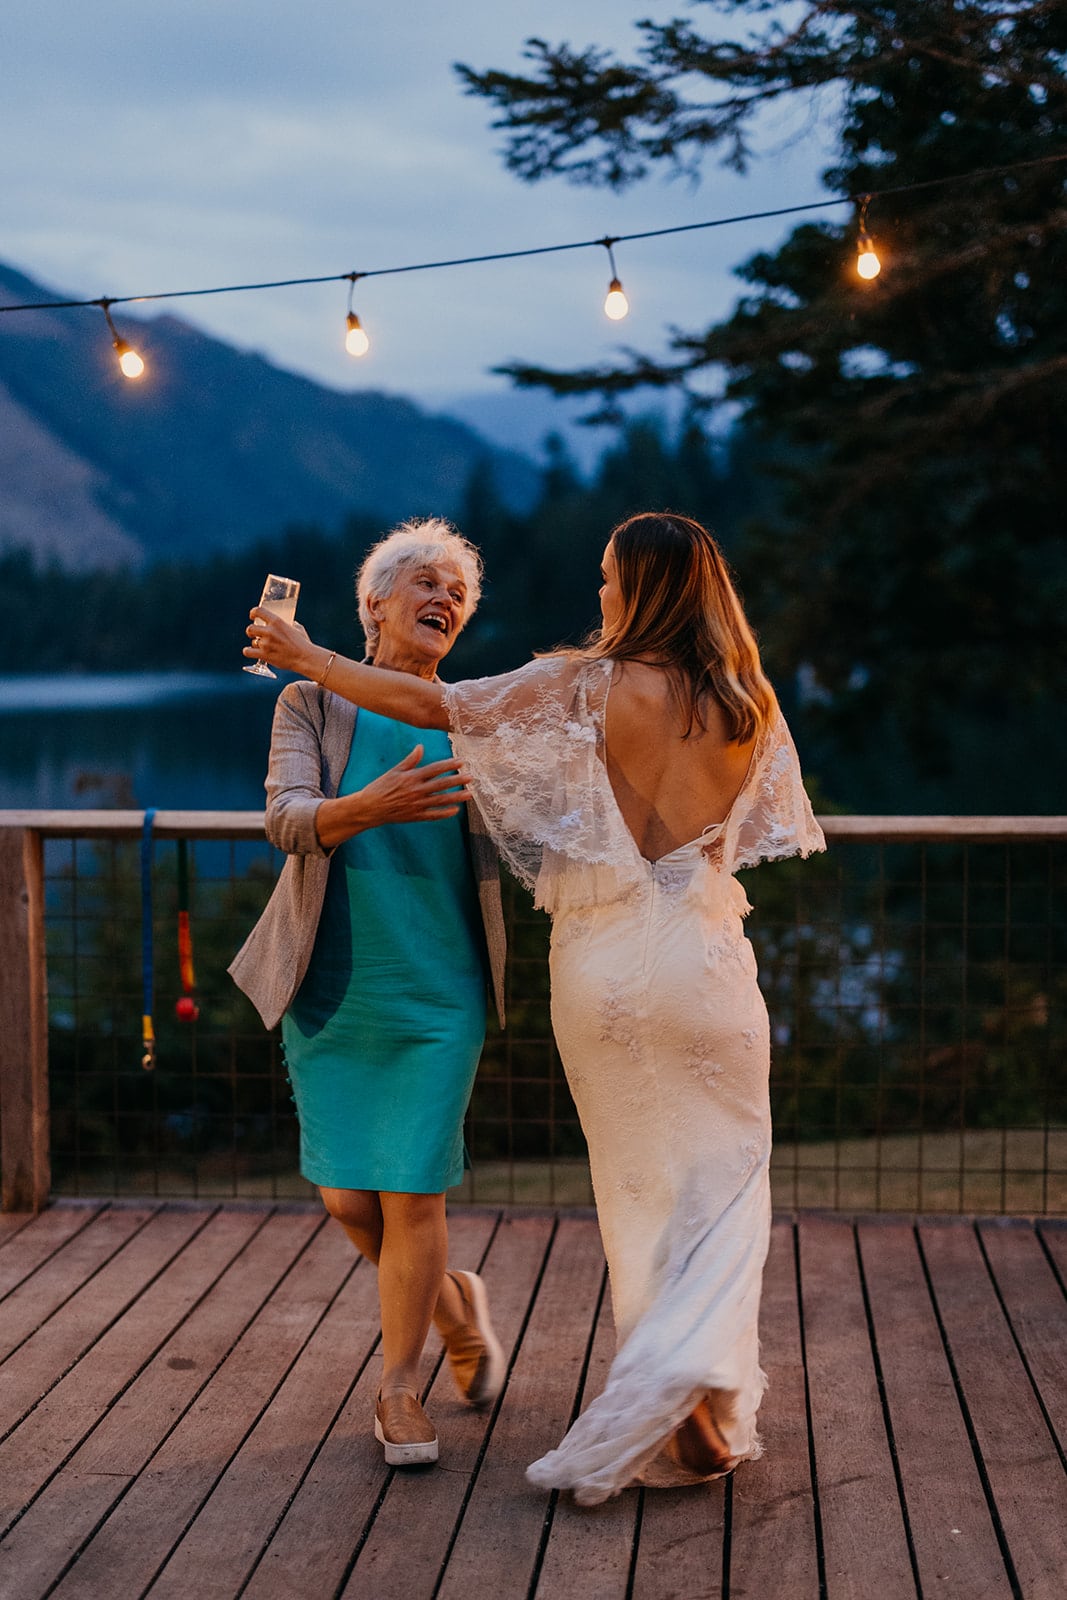 The bride dances with her mom.